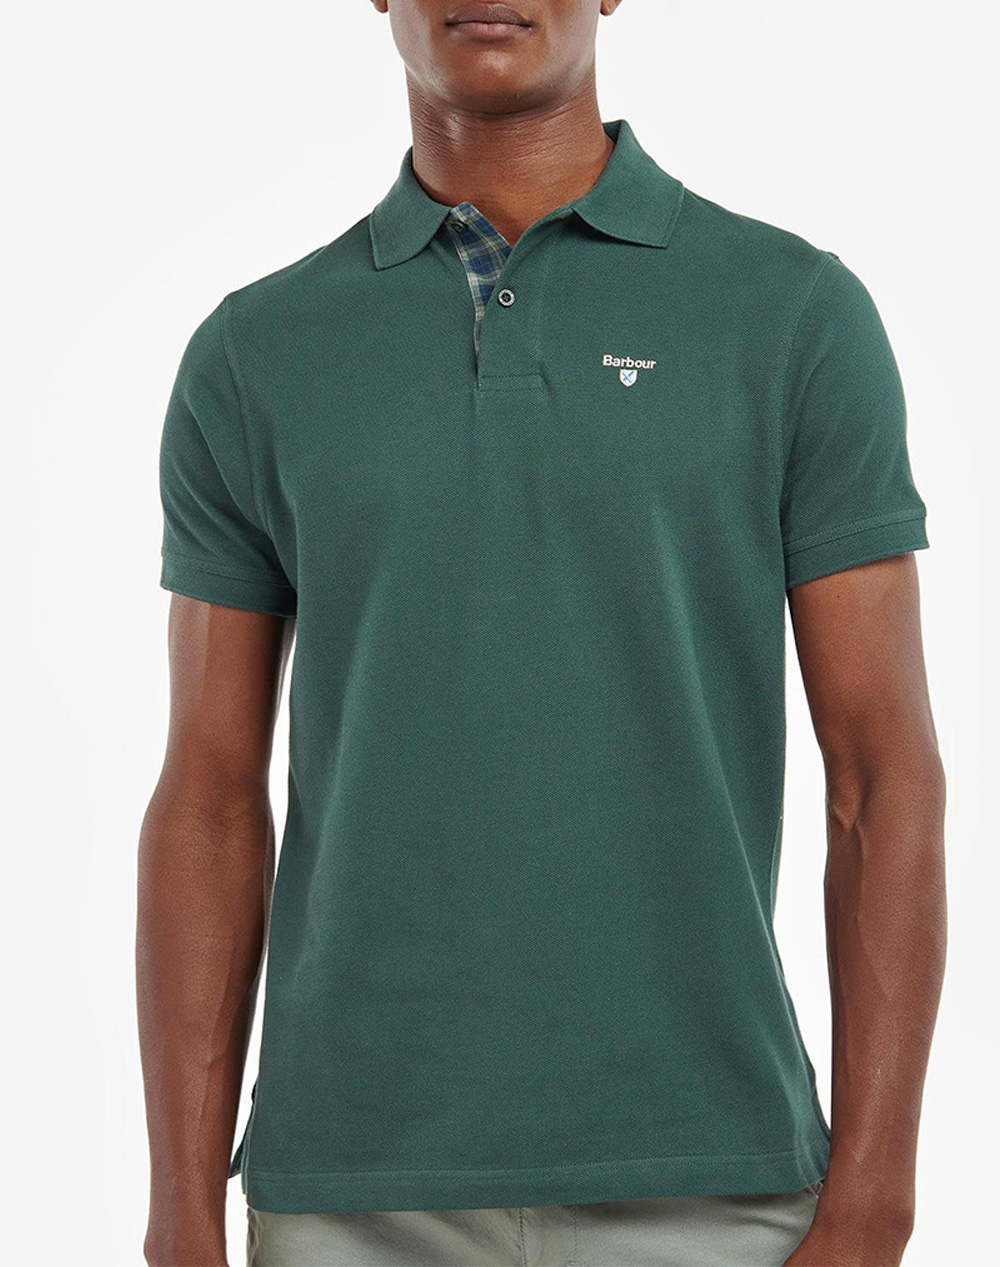 BARBOUR BARBOUR TARTAN PIQUE POLO ΜΠΛΟΥΖΑ POLO MML0012-BRGN89 Green